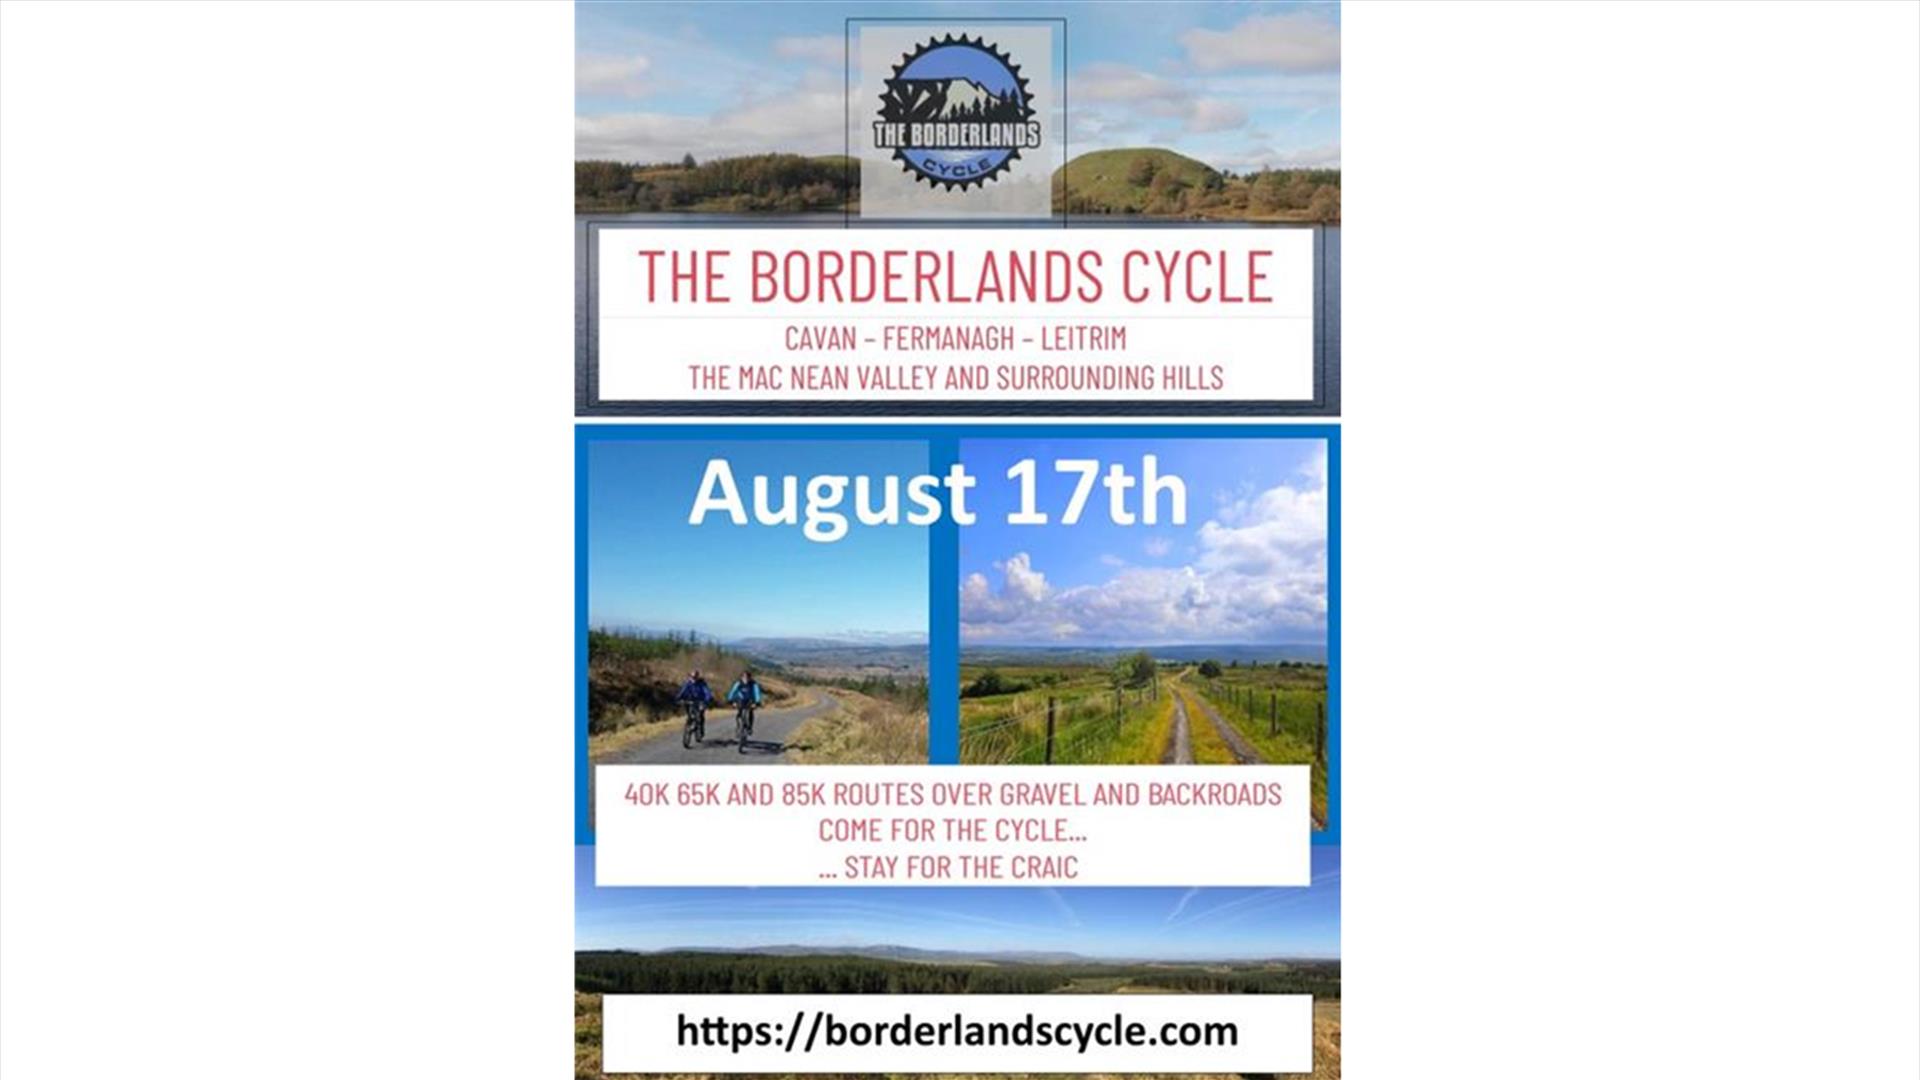 The Borderlands Cycle